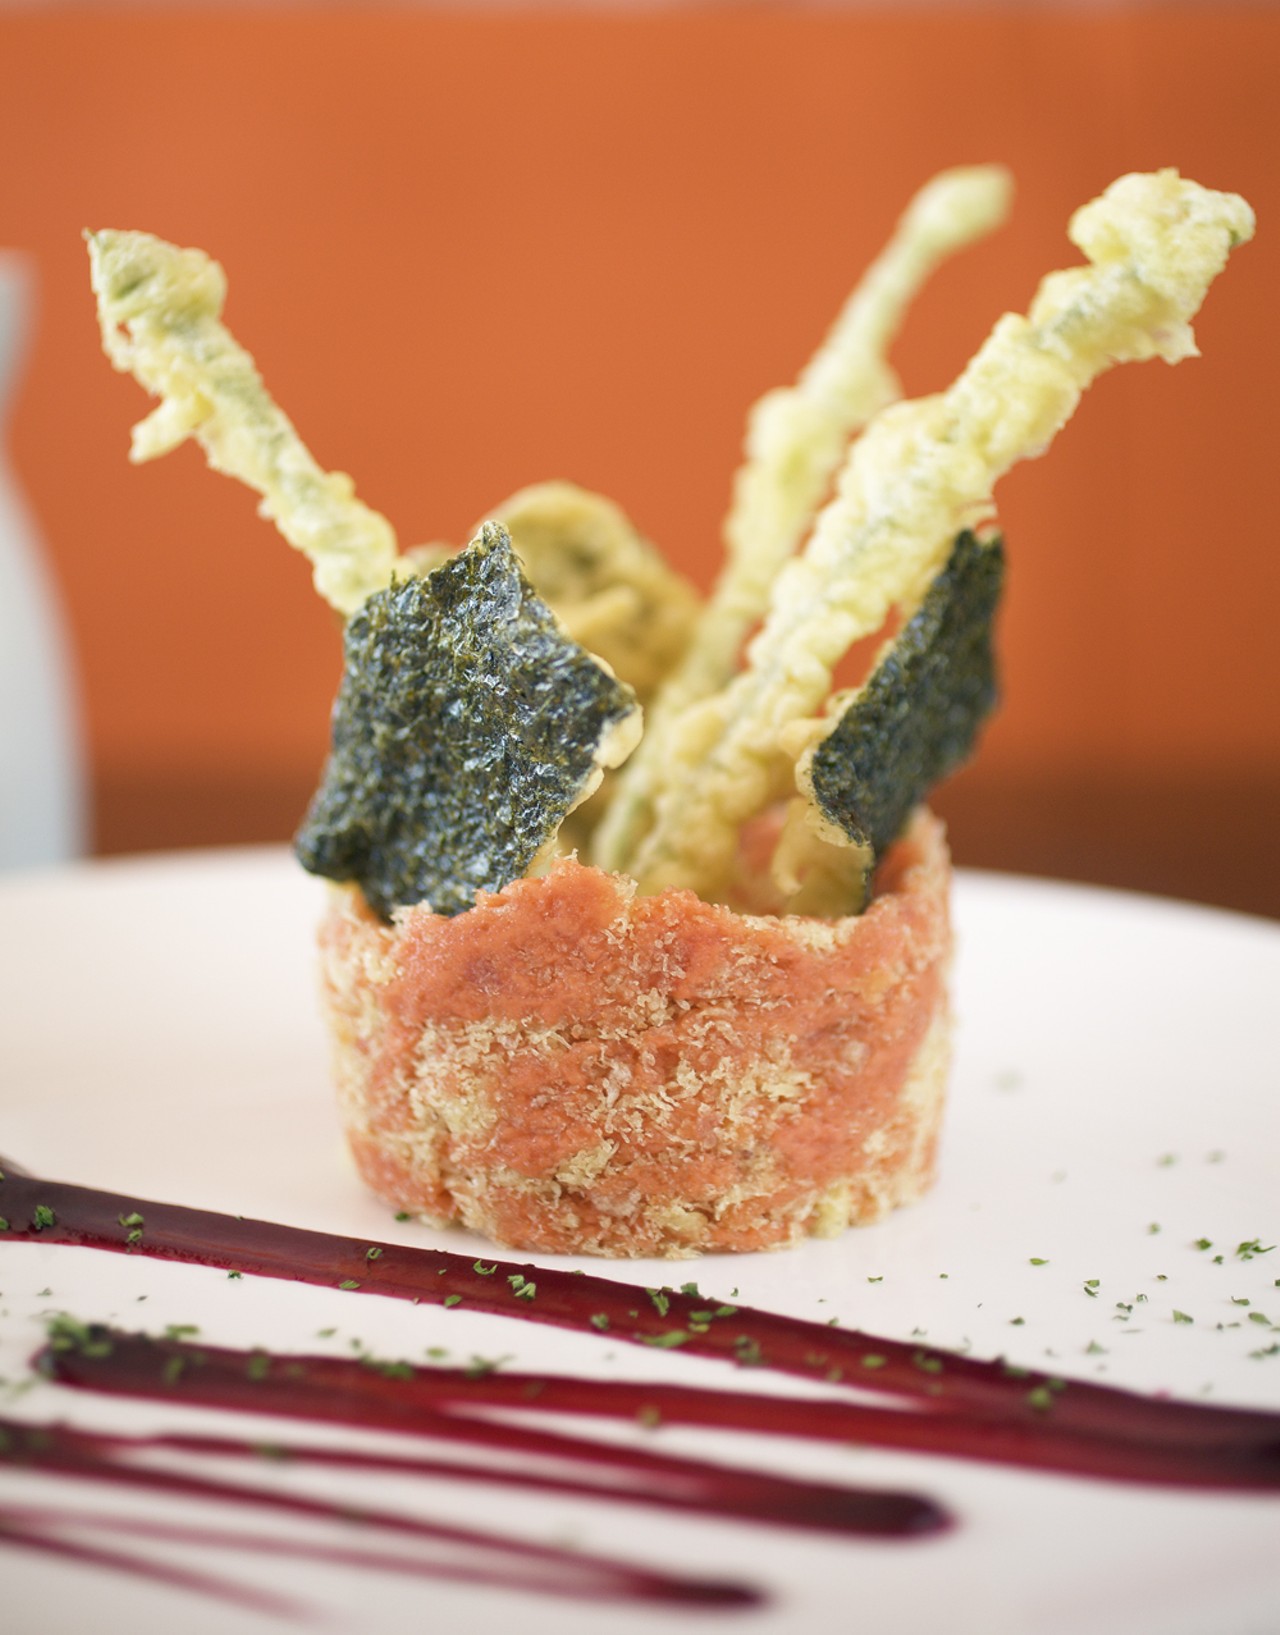 The Crunchy Tuna Tower is mashed spicy tuna with Wasabi cracker and tempura chive flower.